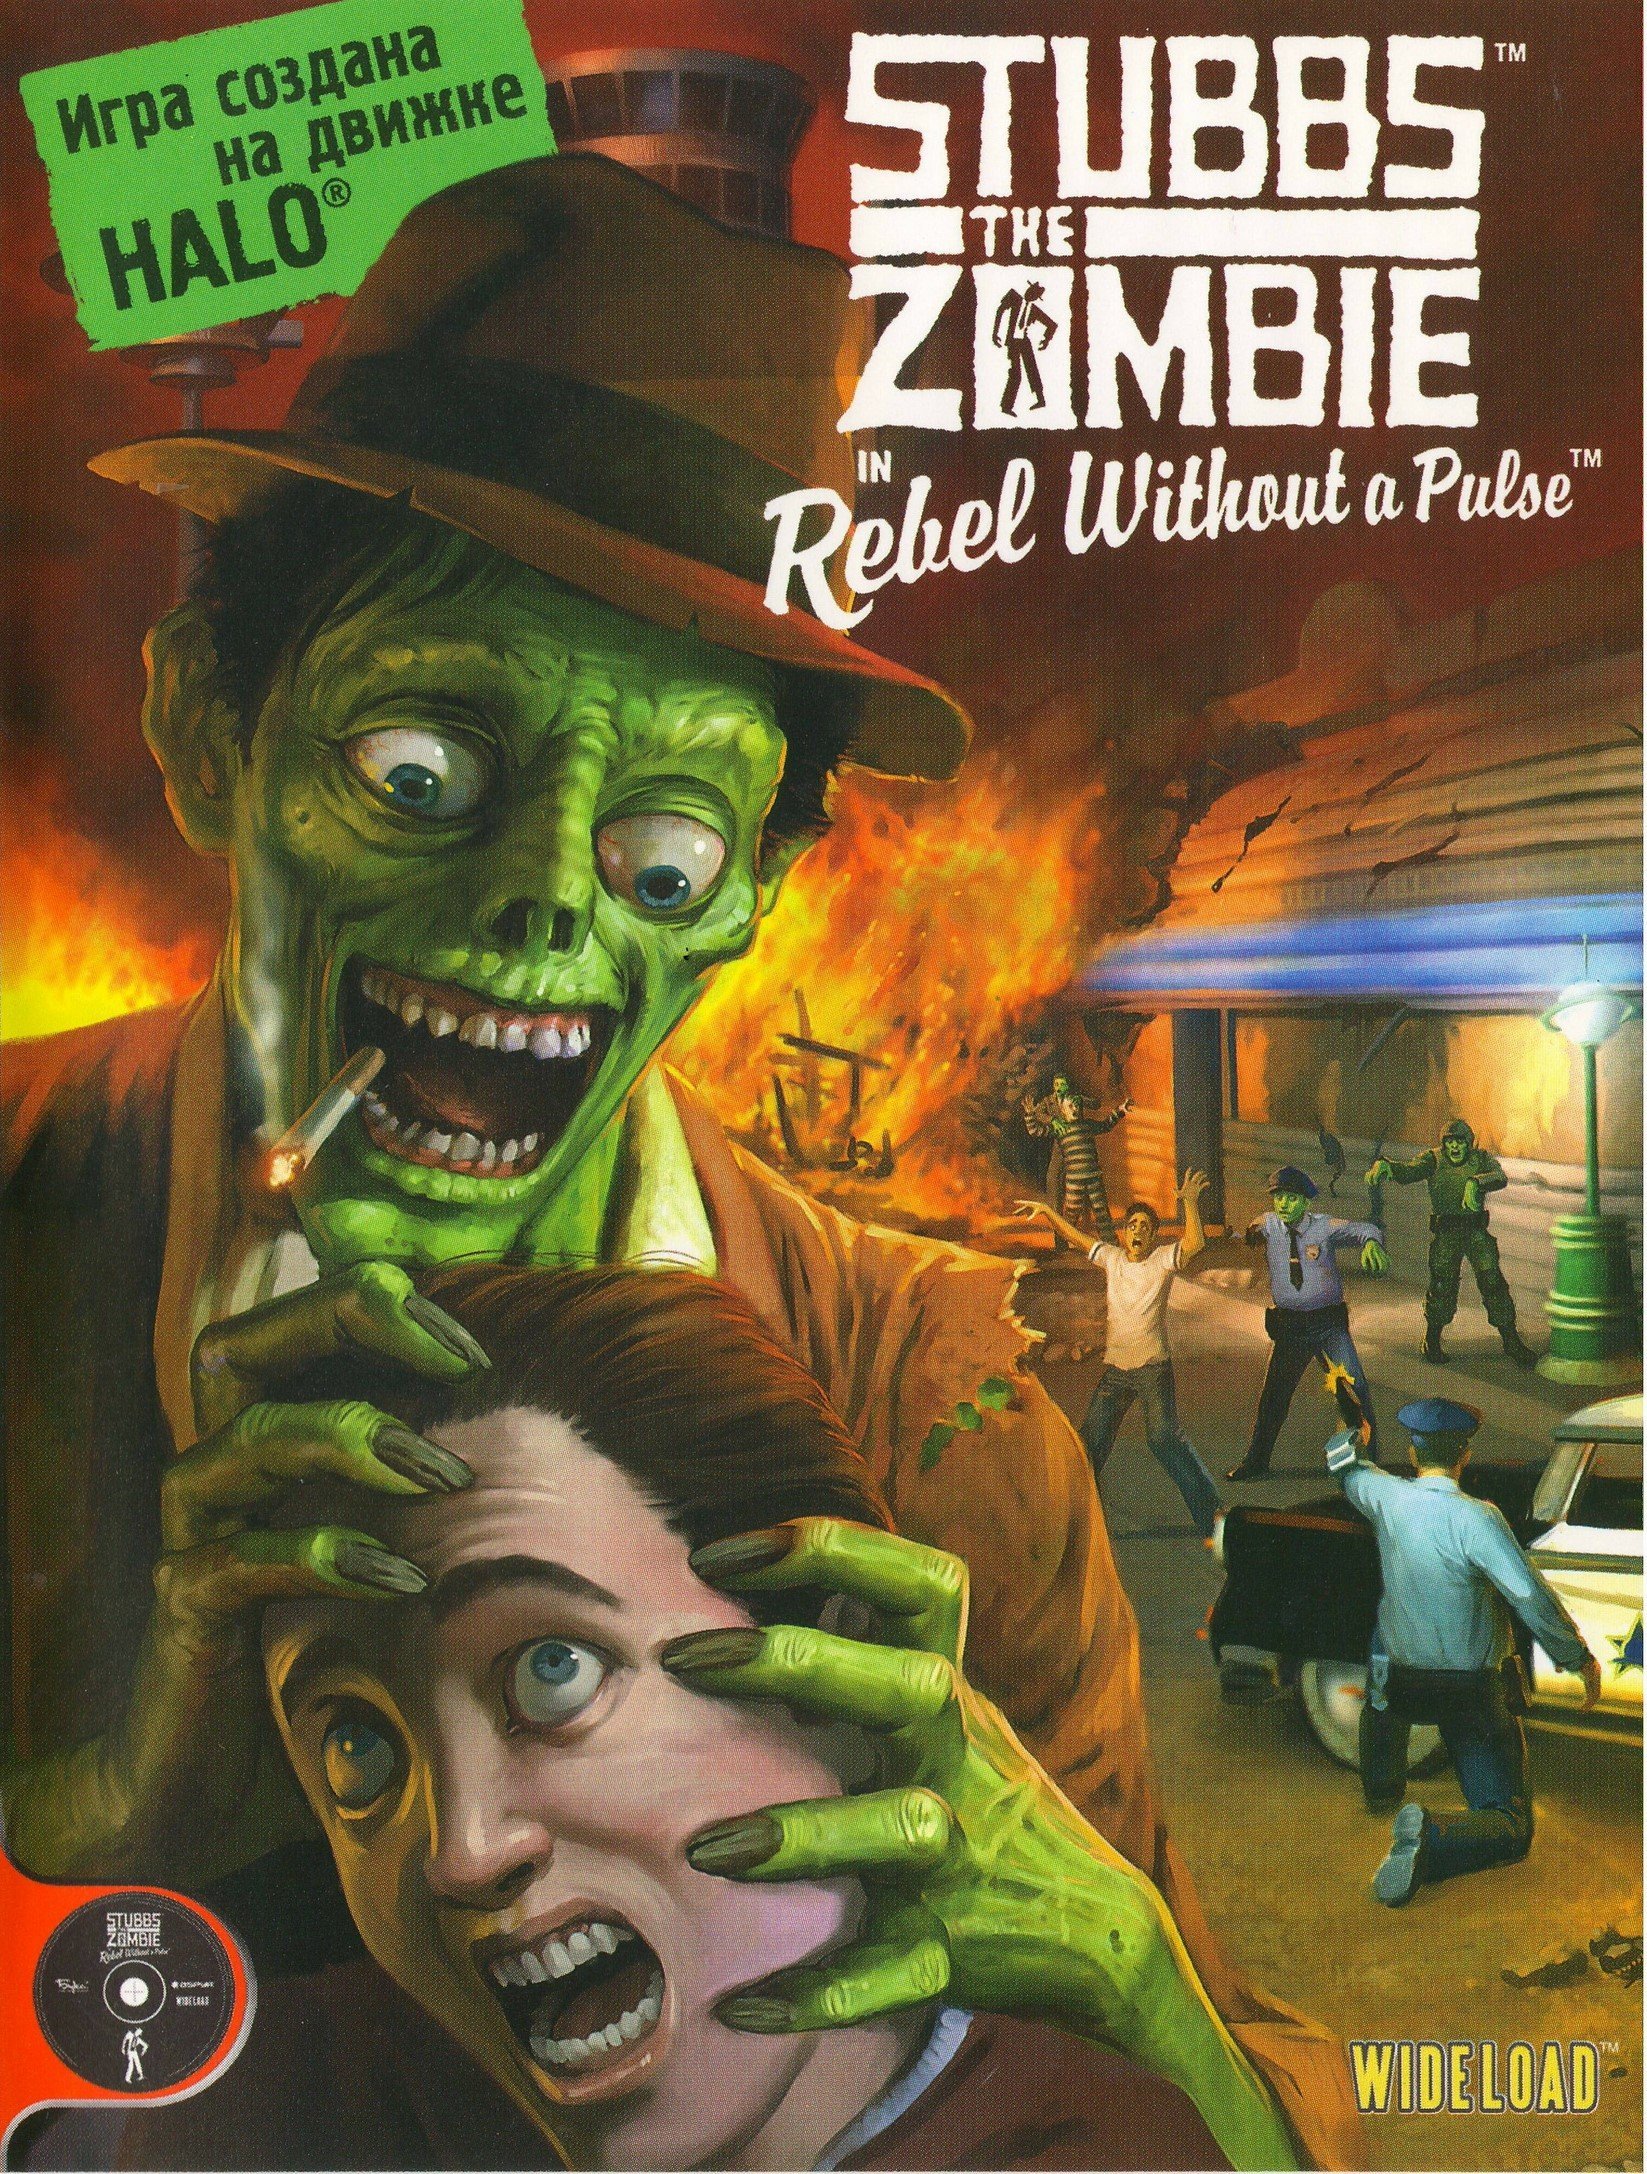 Stubbs the Zombie in Rebel Without a Pulse v.1.02 [Бука] (2005) скачать торрент Лицензия